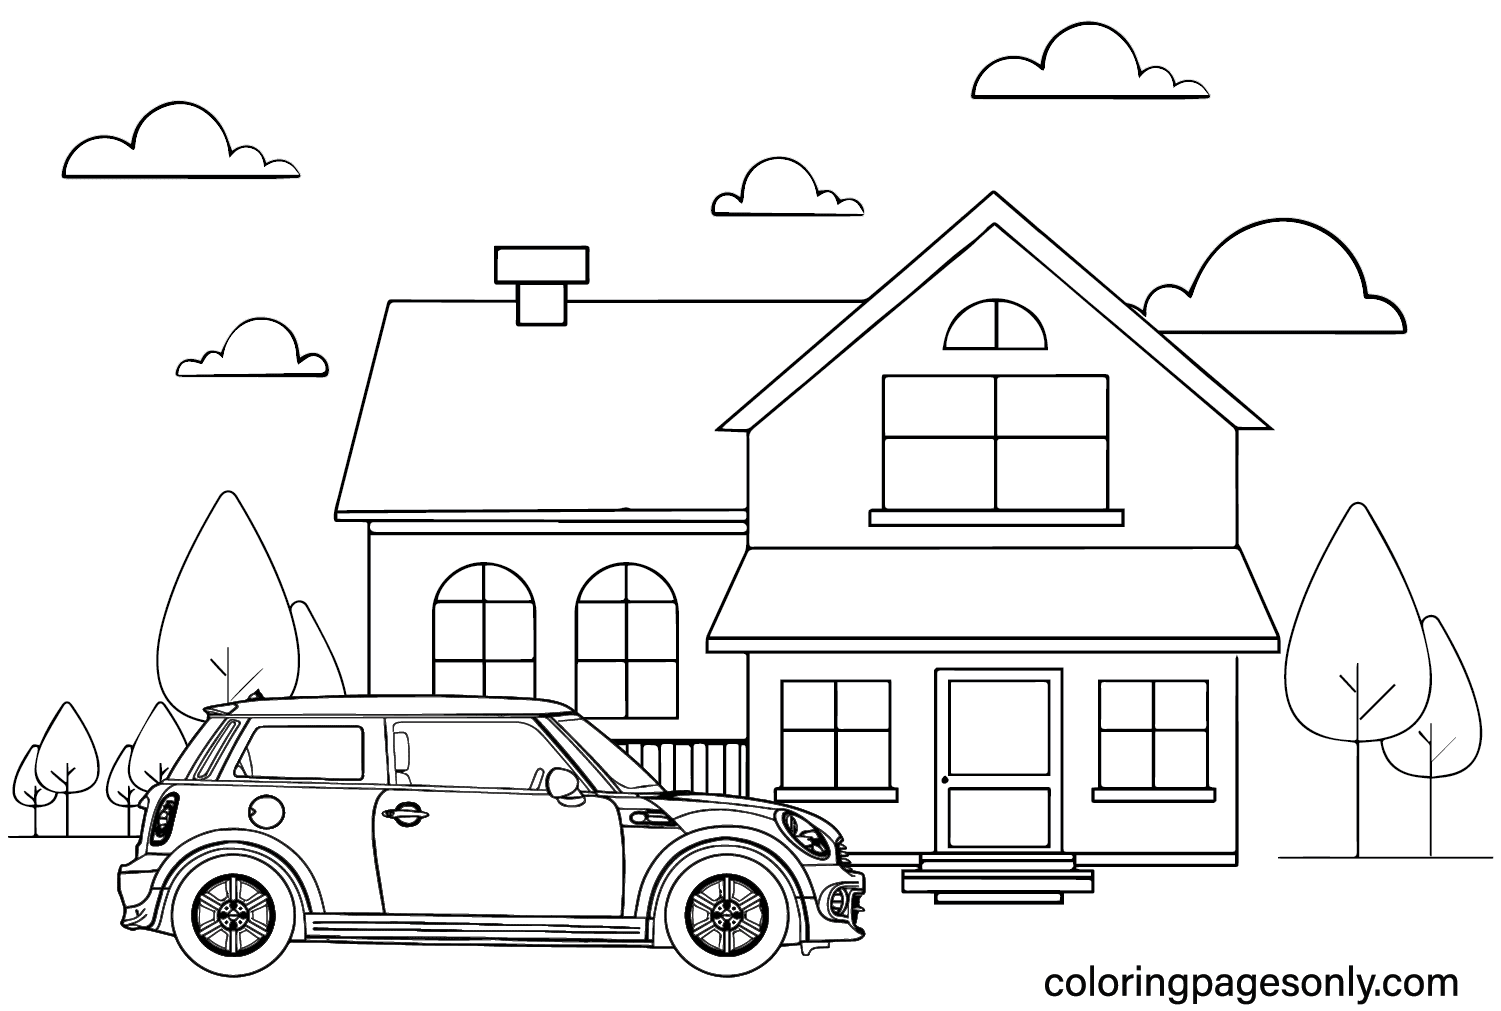 Mini Cooper S Hatchback Coloring Page from Mini Cooper